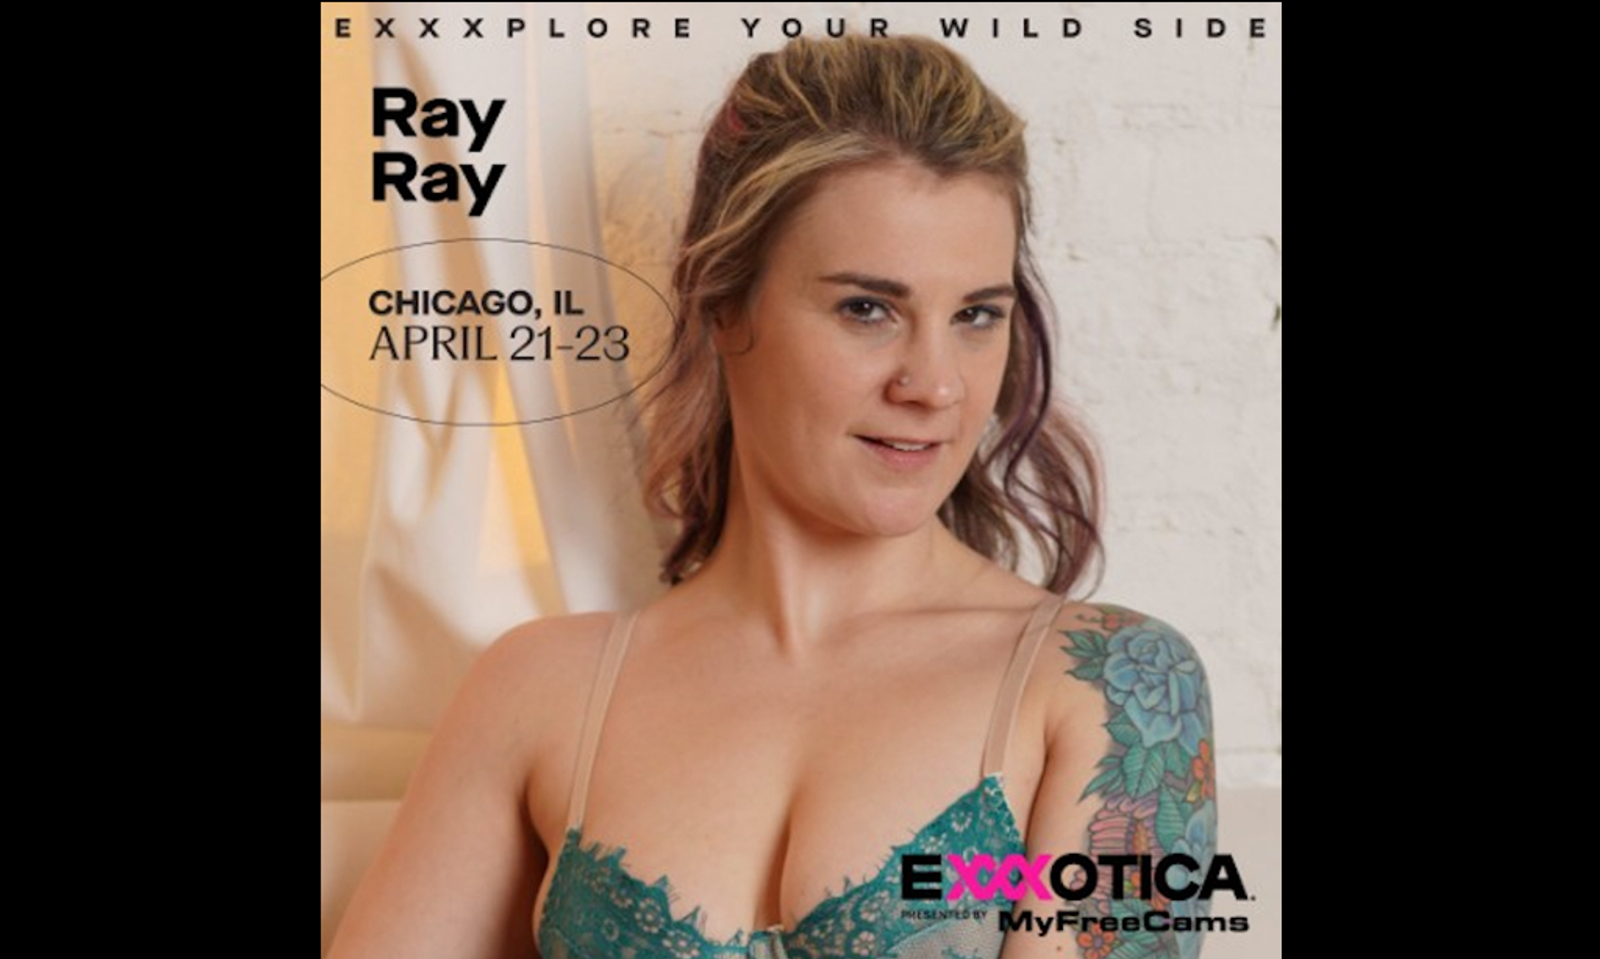 Ray Ray is Set to Attend Exxxotica Chicago